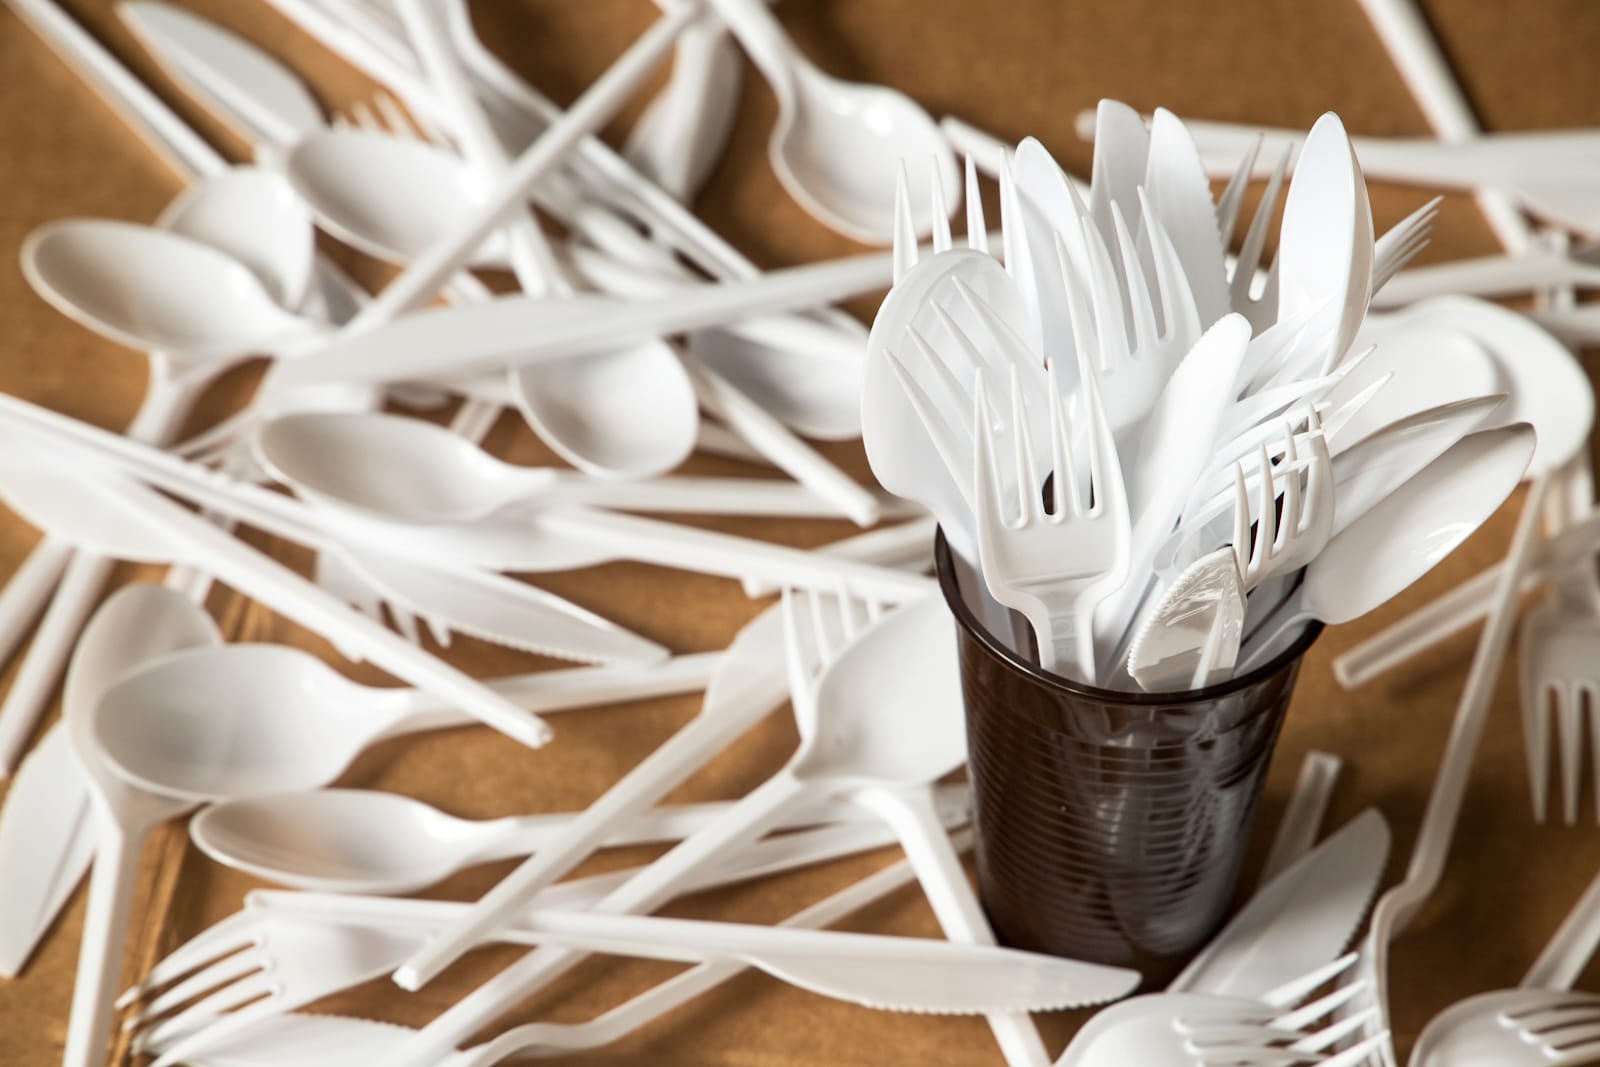 Plastic forks, spoons, and knives are in a cup and spread out on a table.